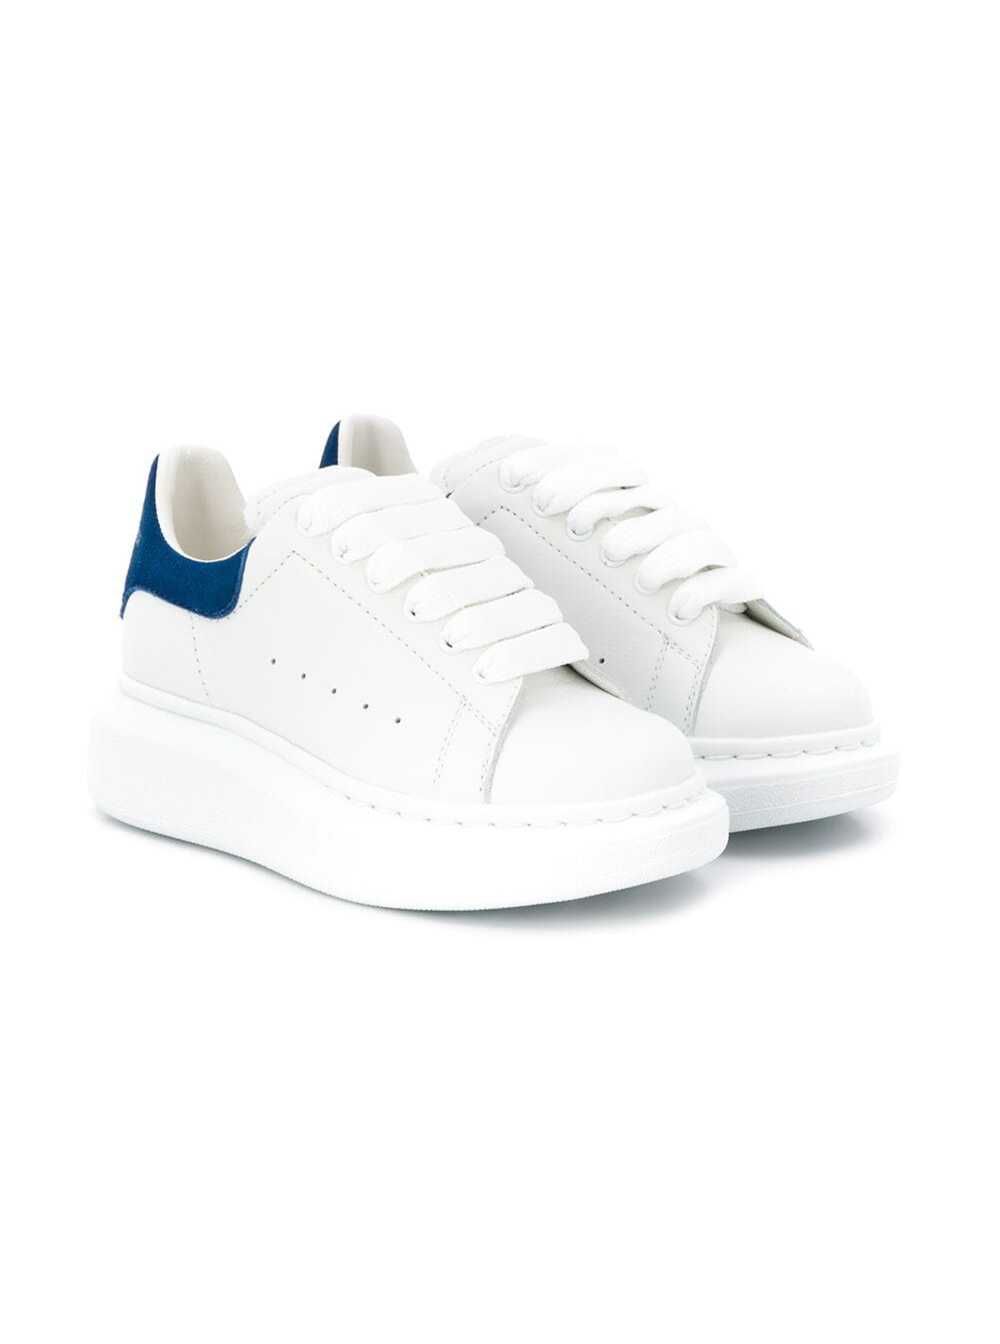 Alexander Mcqueen Kids Boys White Leather Oversize Sneakers With Blue Heel Tab